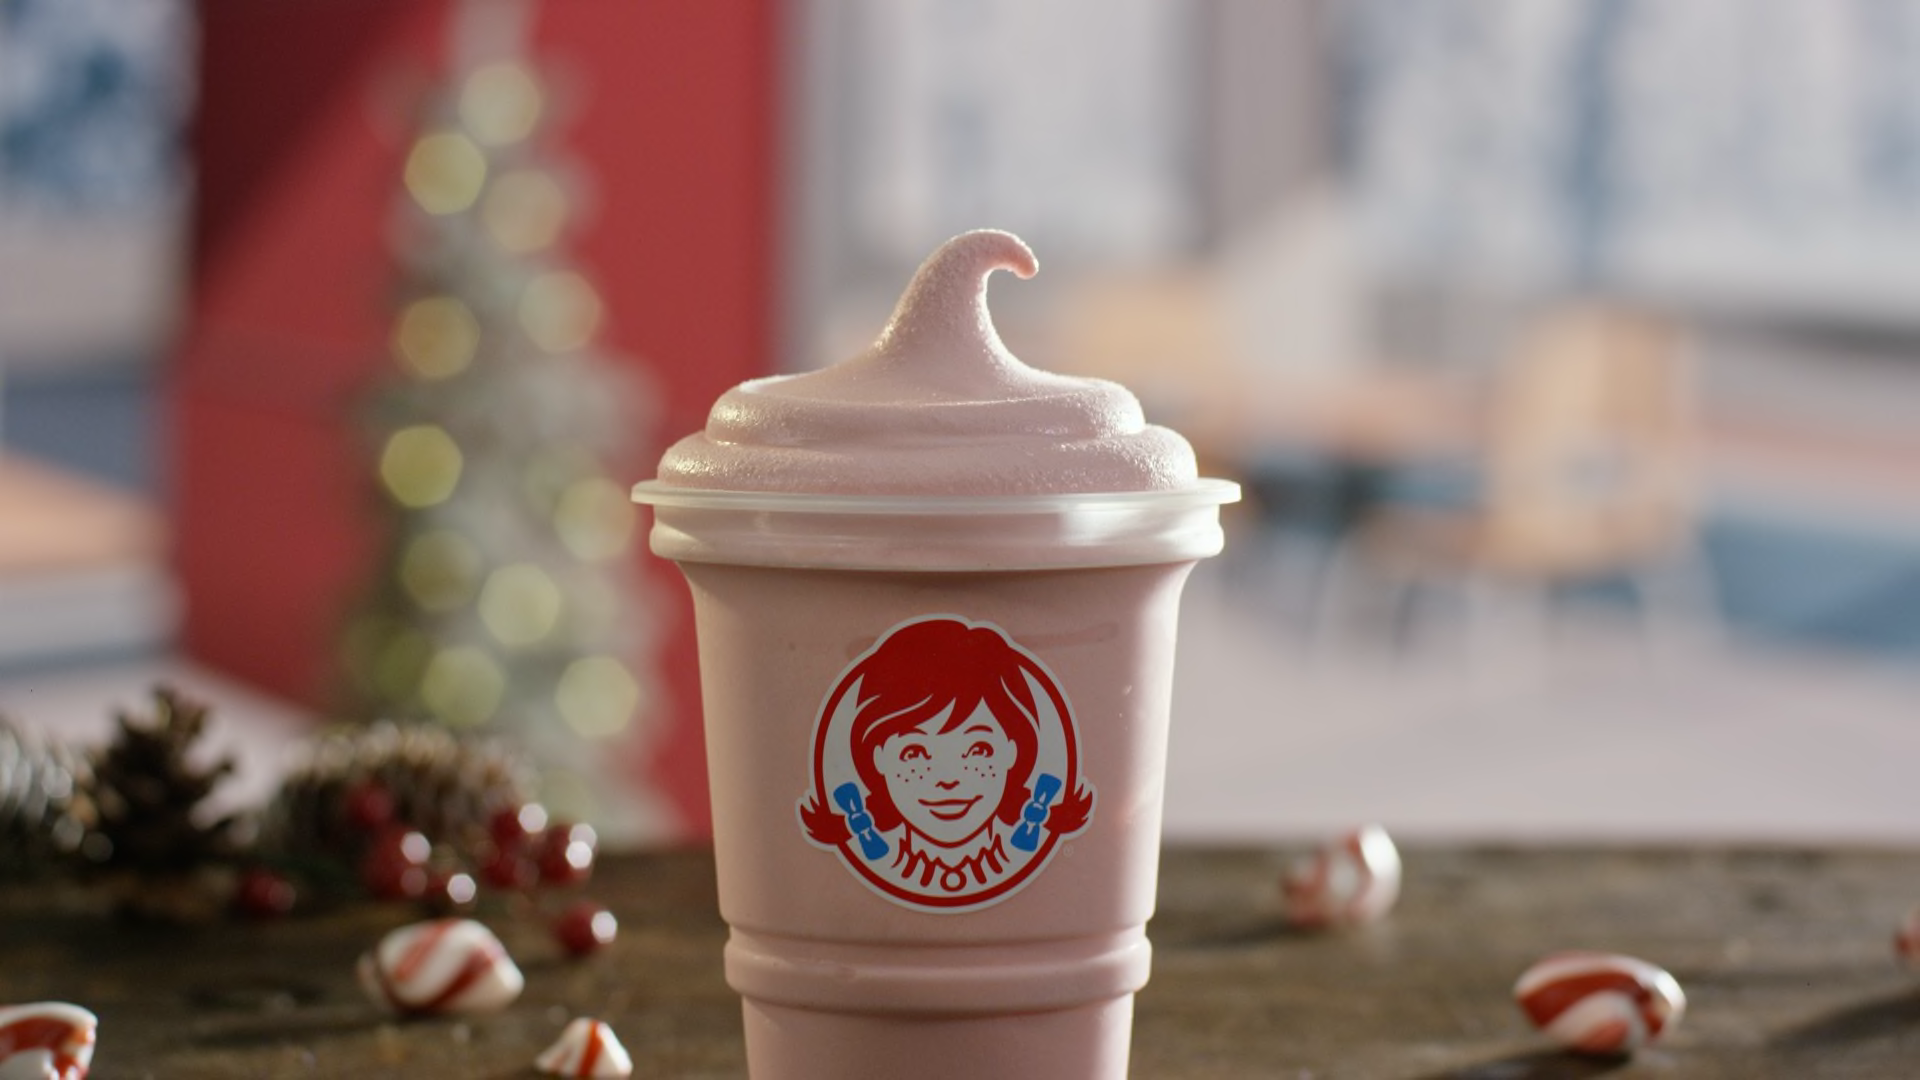 Peppermint Frosty is back at Wendy's